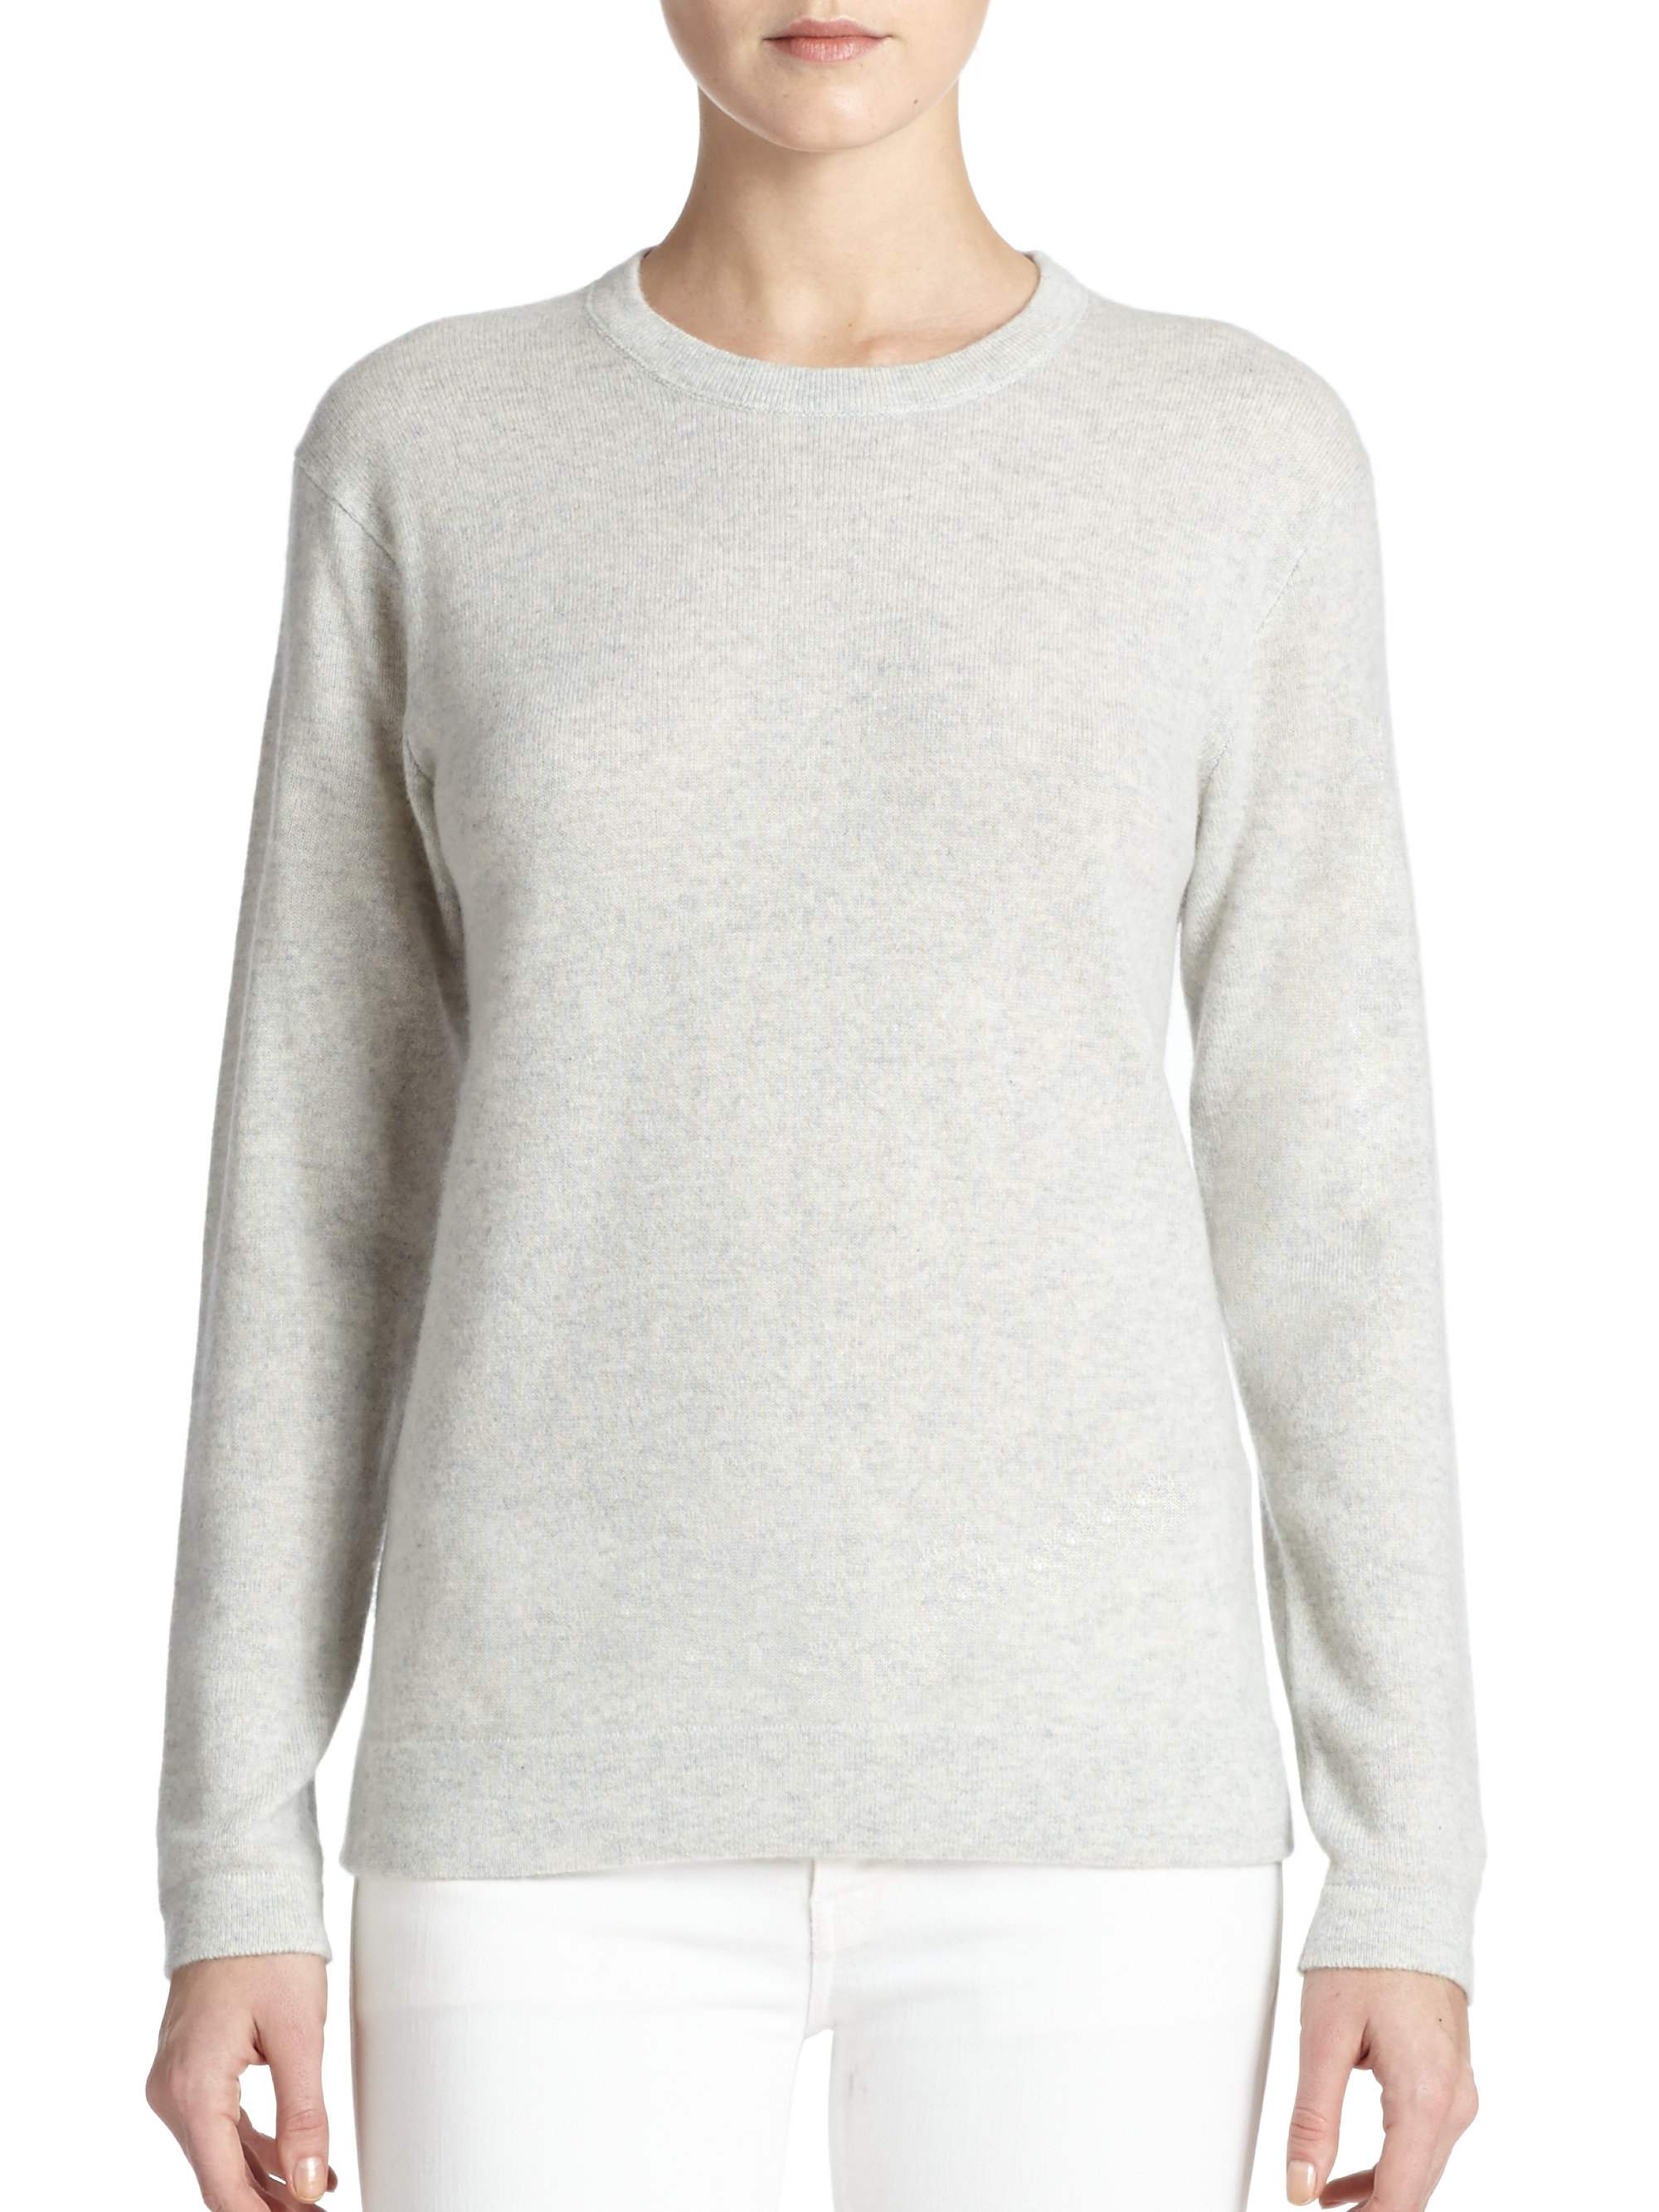 Polo ralph lauren Cashmere Crewneck Sweater in Gray | Lyst